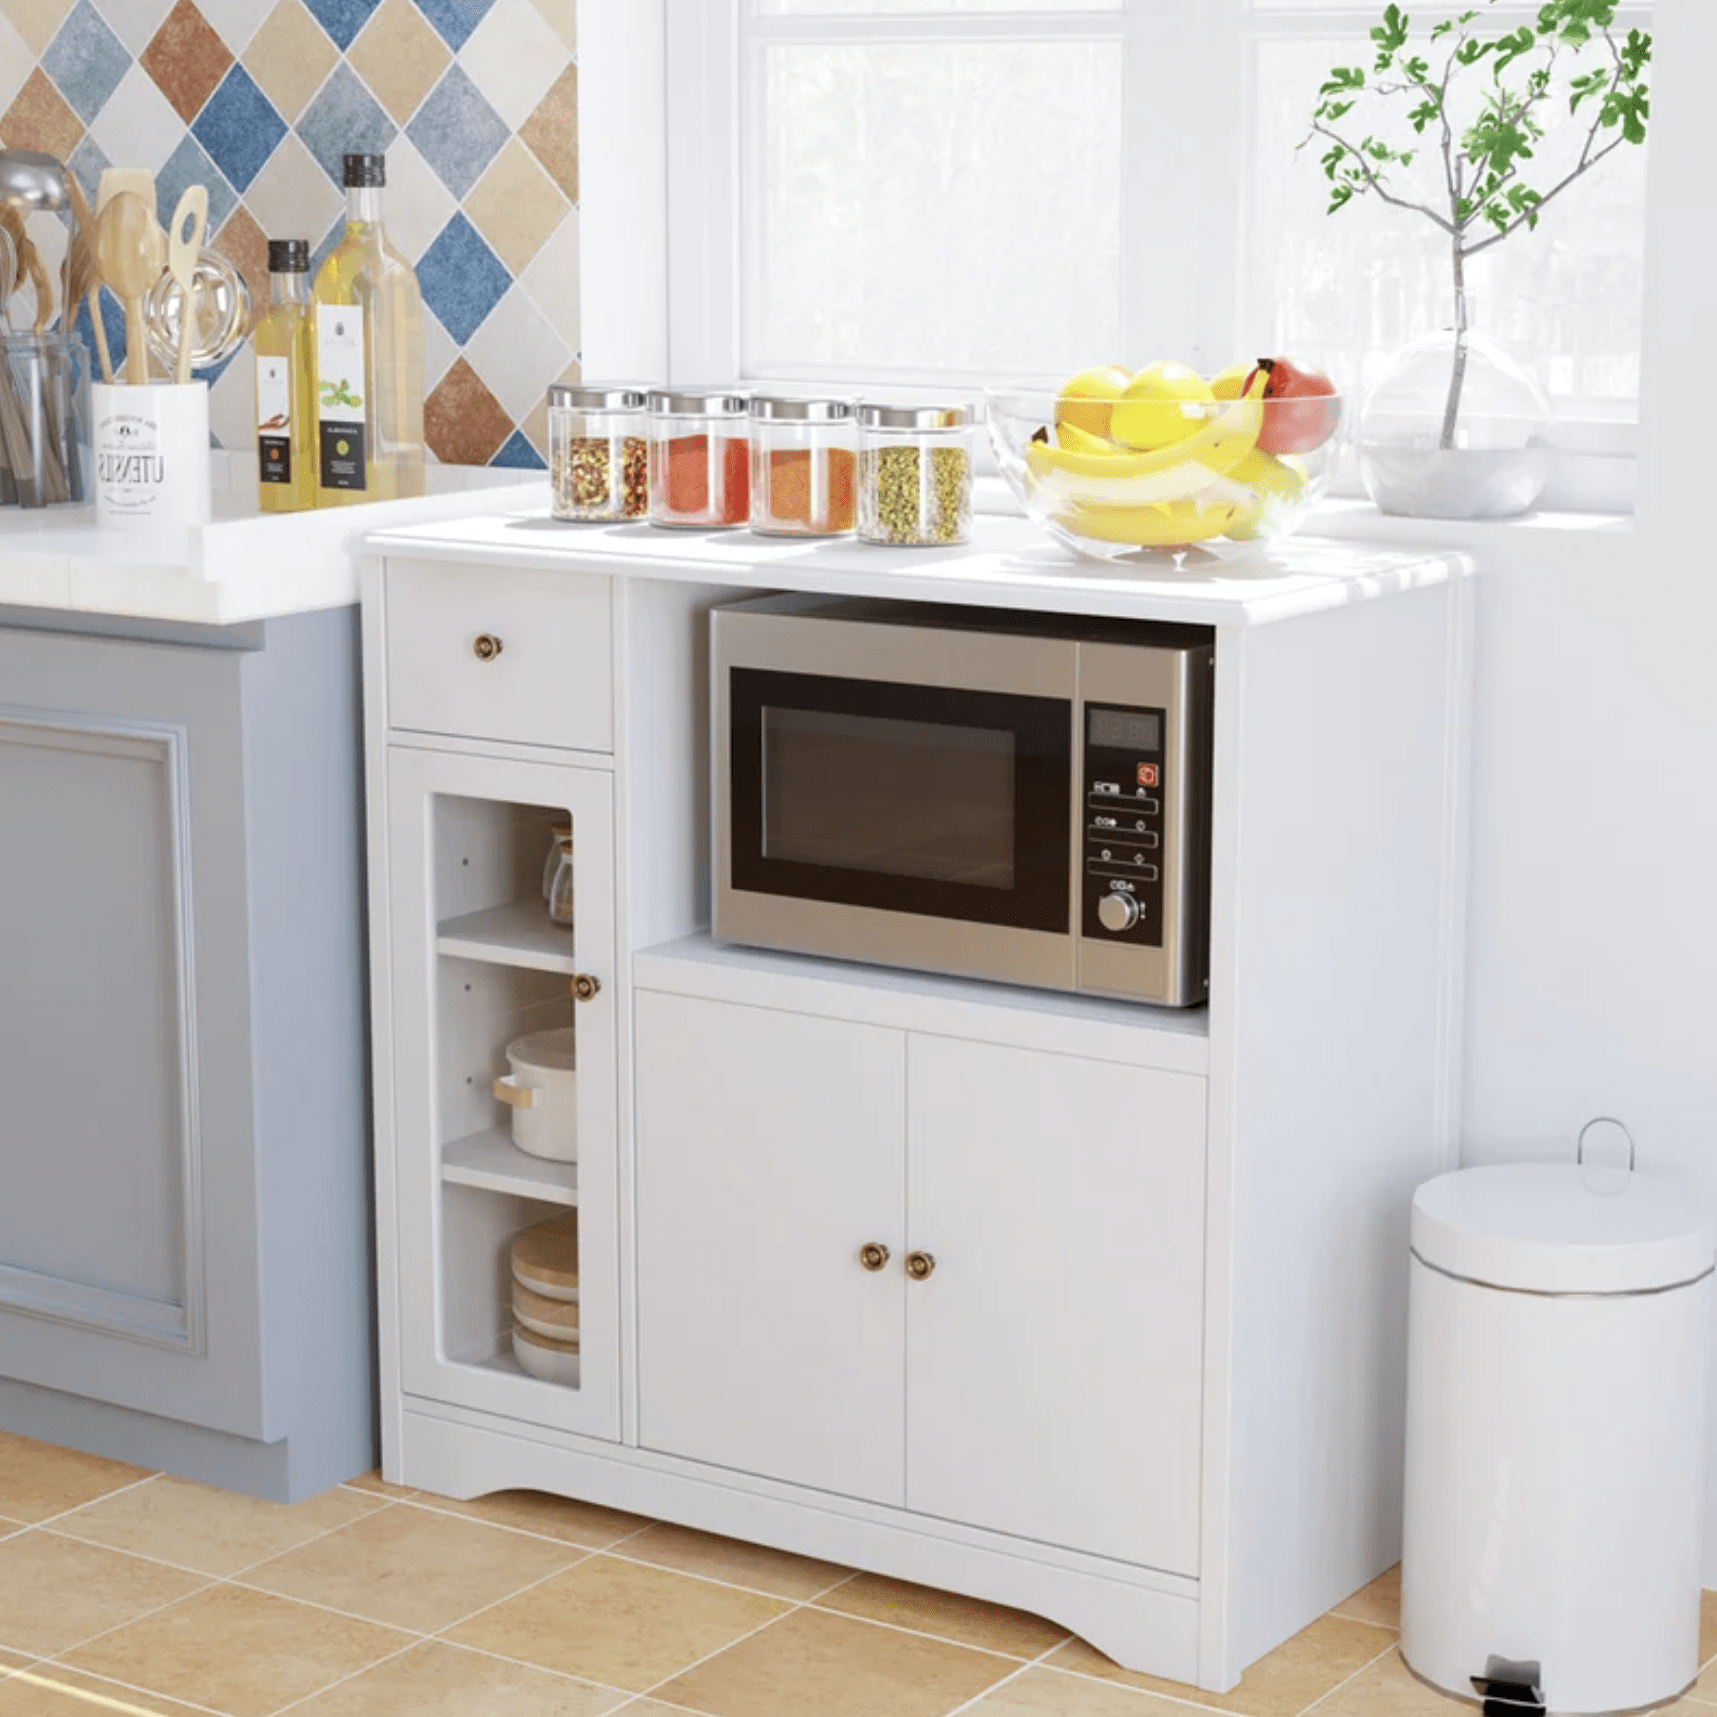 Kitchen cupboard storage ideas: top buys we really rate